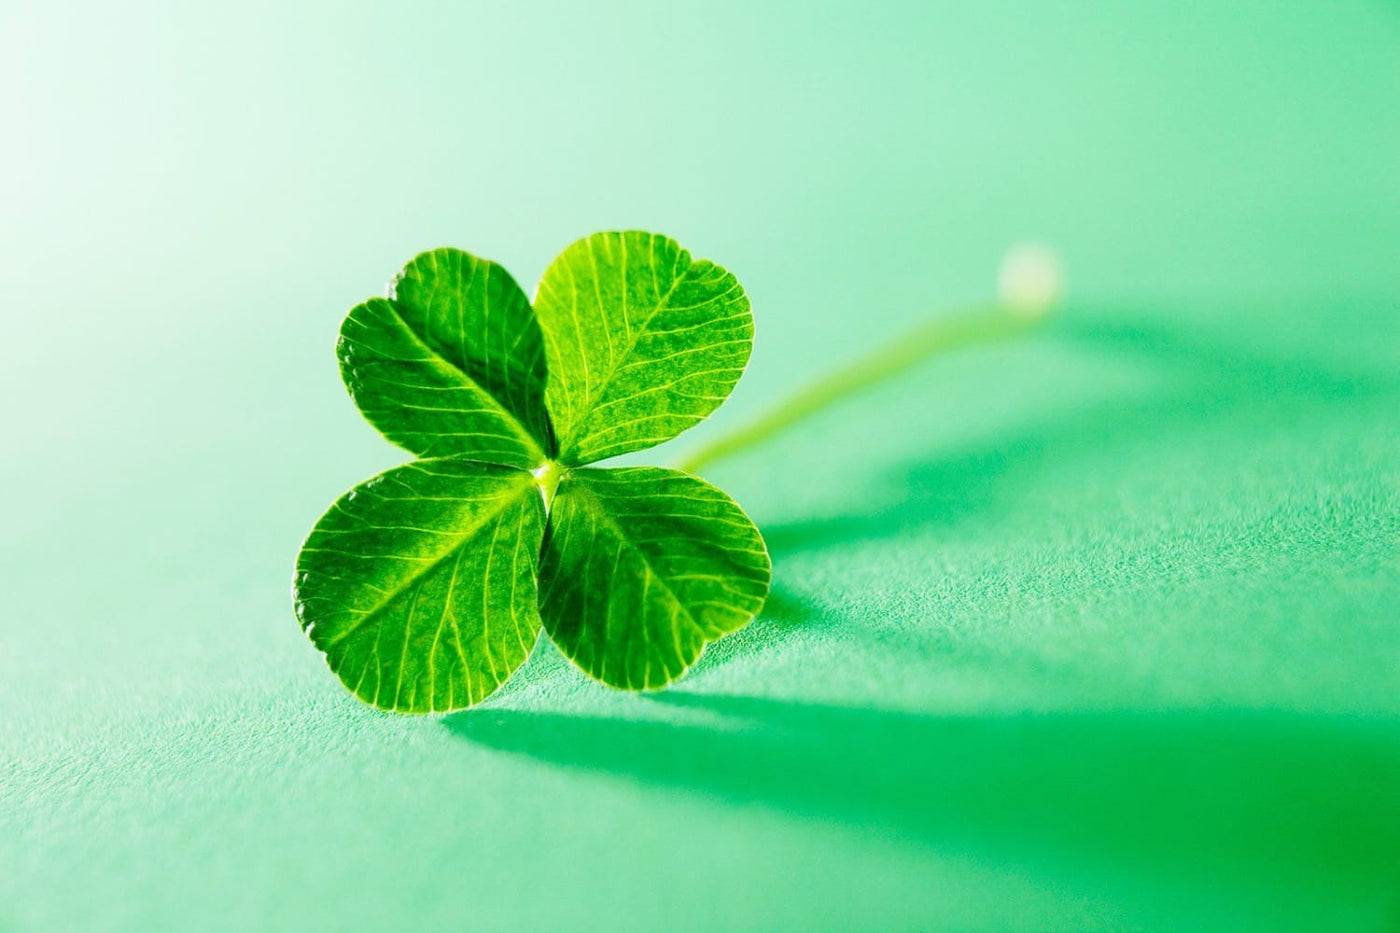 Four-leaf clover: Why are they considered a symbol of good luck?